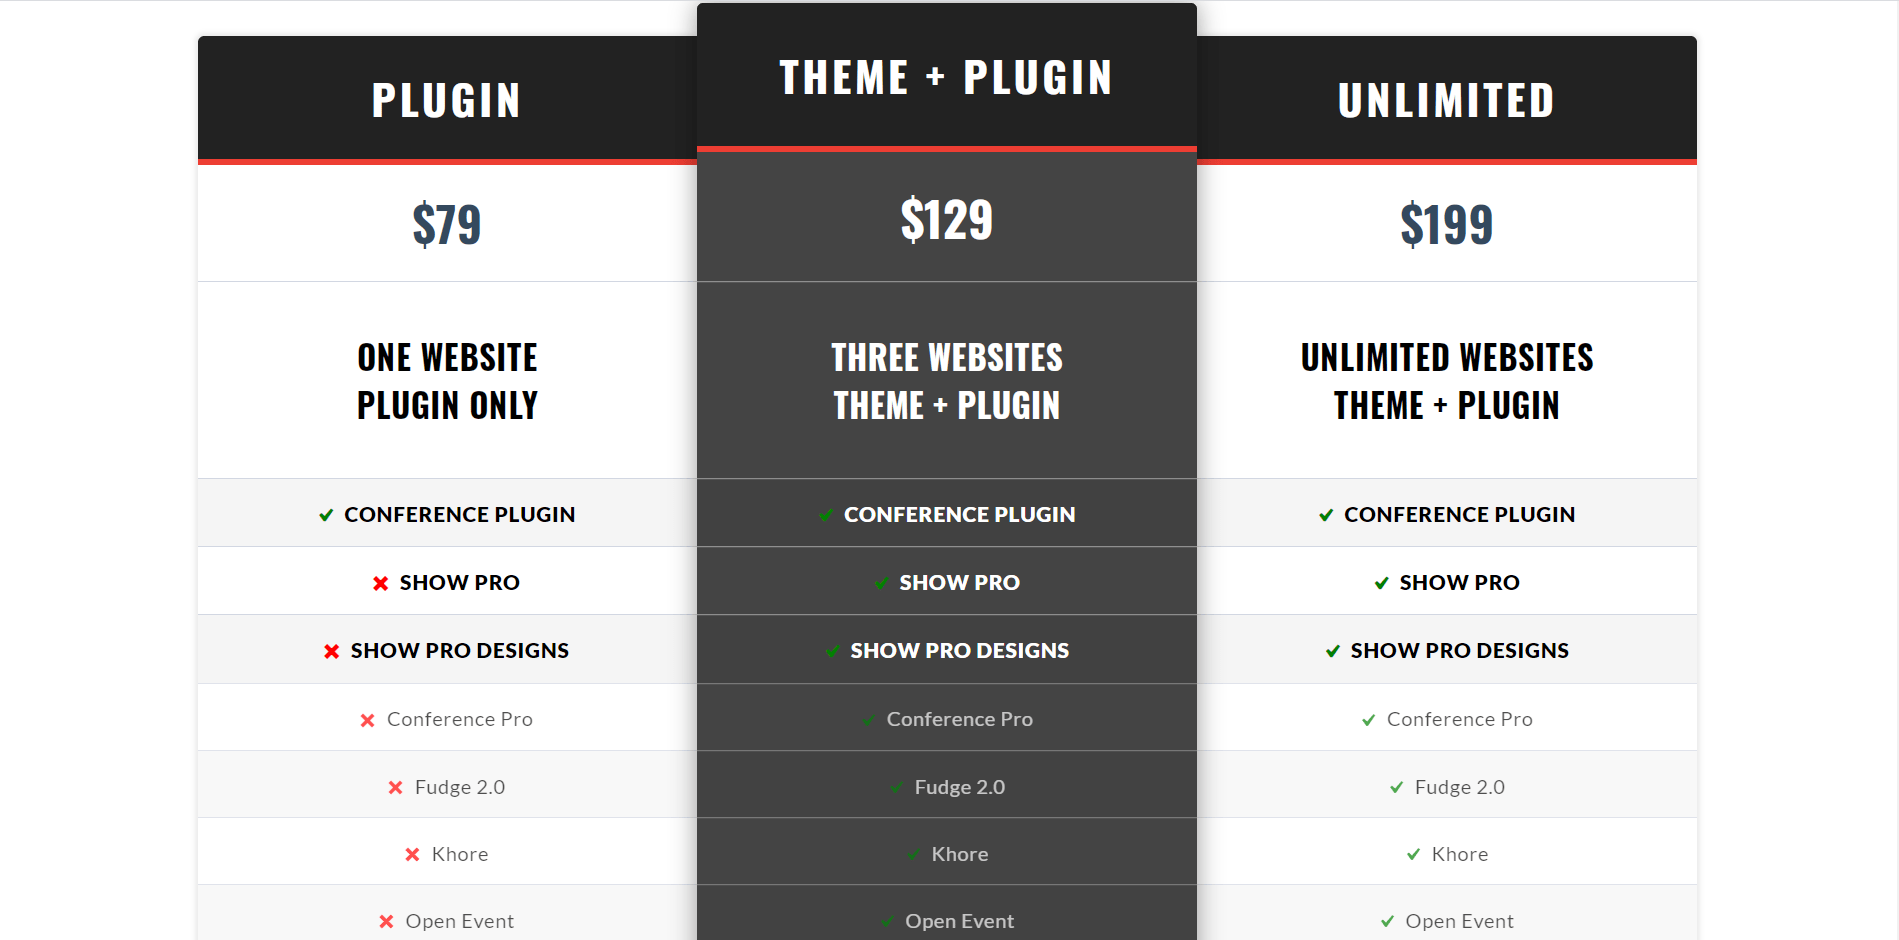  pricing - Show Themes Black Friday Deals